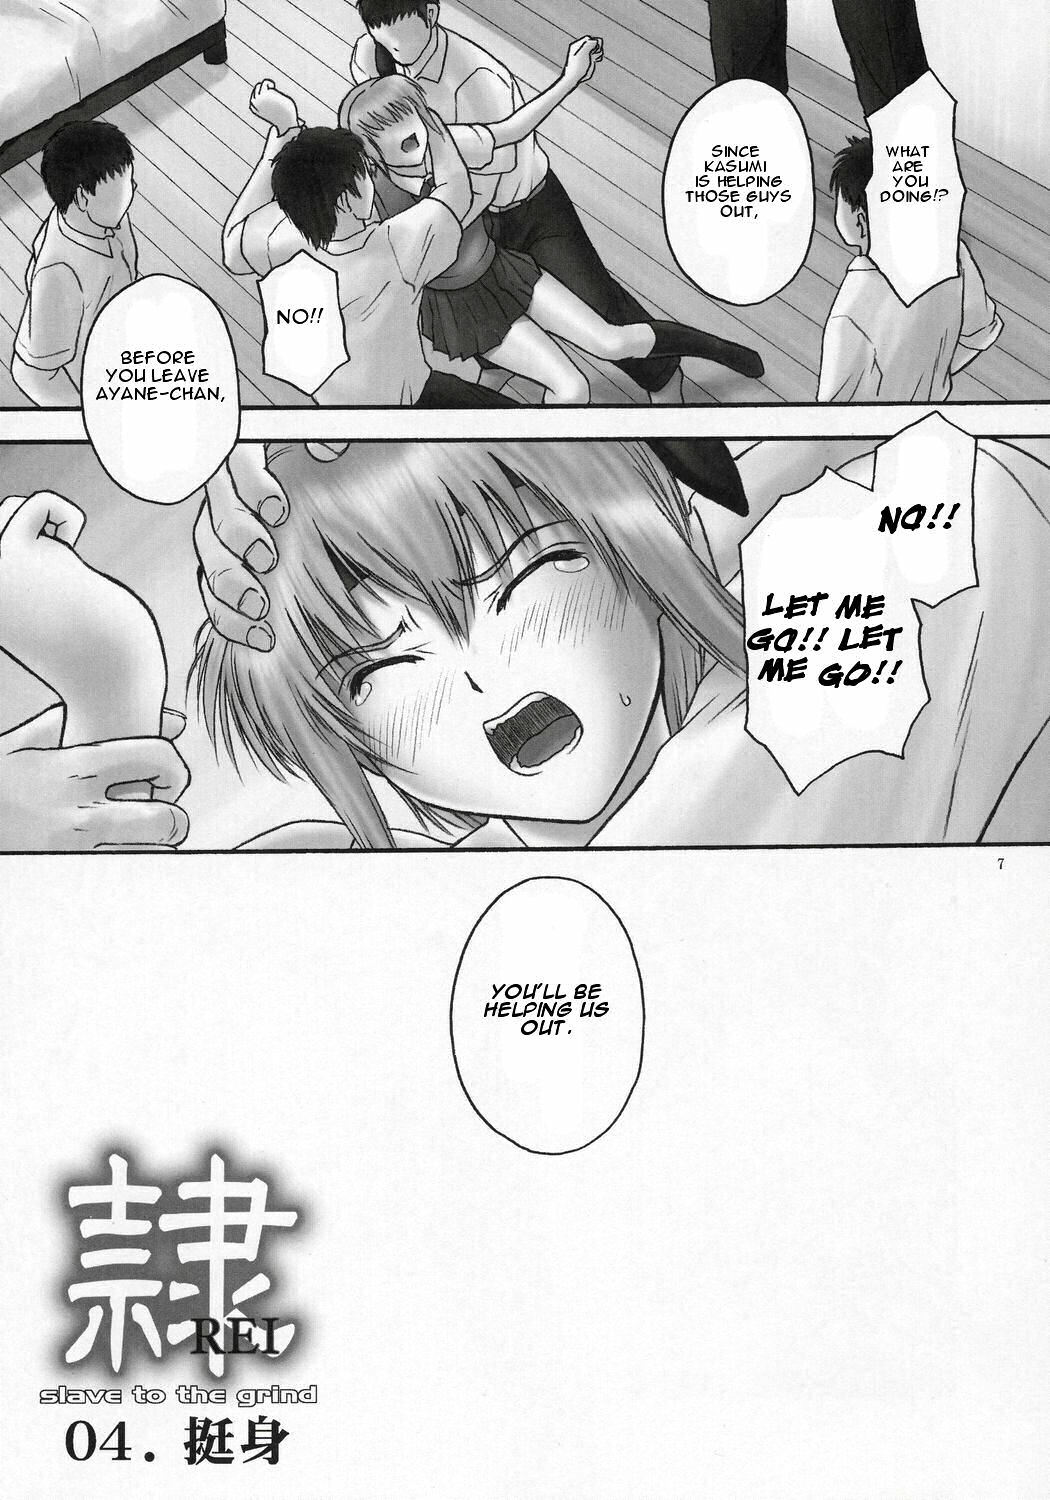 (C71) [Hellabunna (Iruma Kamiri)] Rei Chapter 03: Involve Slave to the Grind (Dead or Alive) [English] [One of a Kind Productions] page 6 full